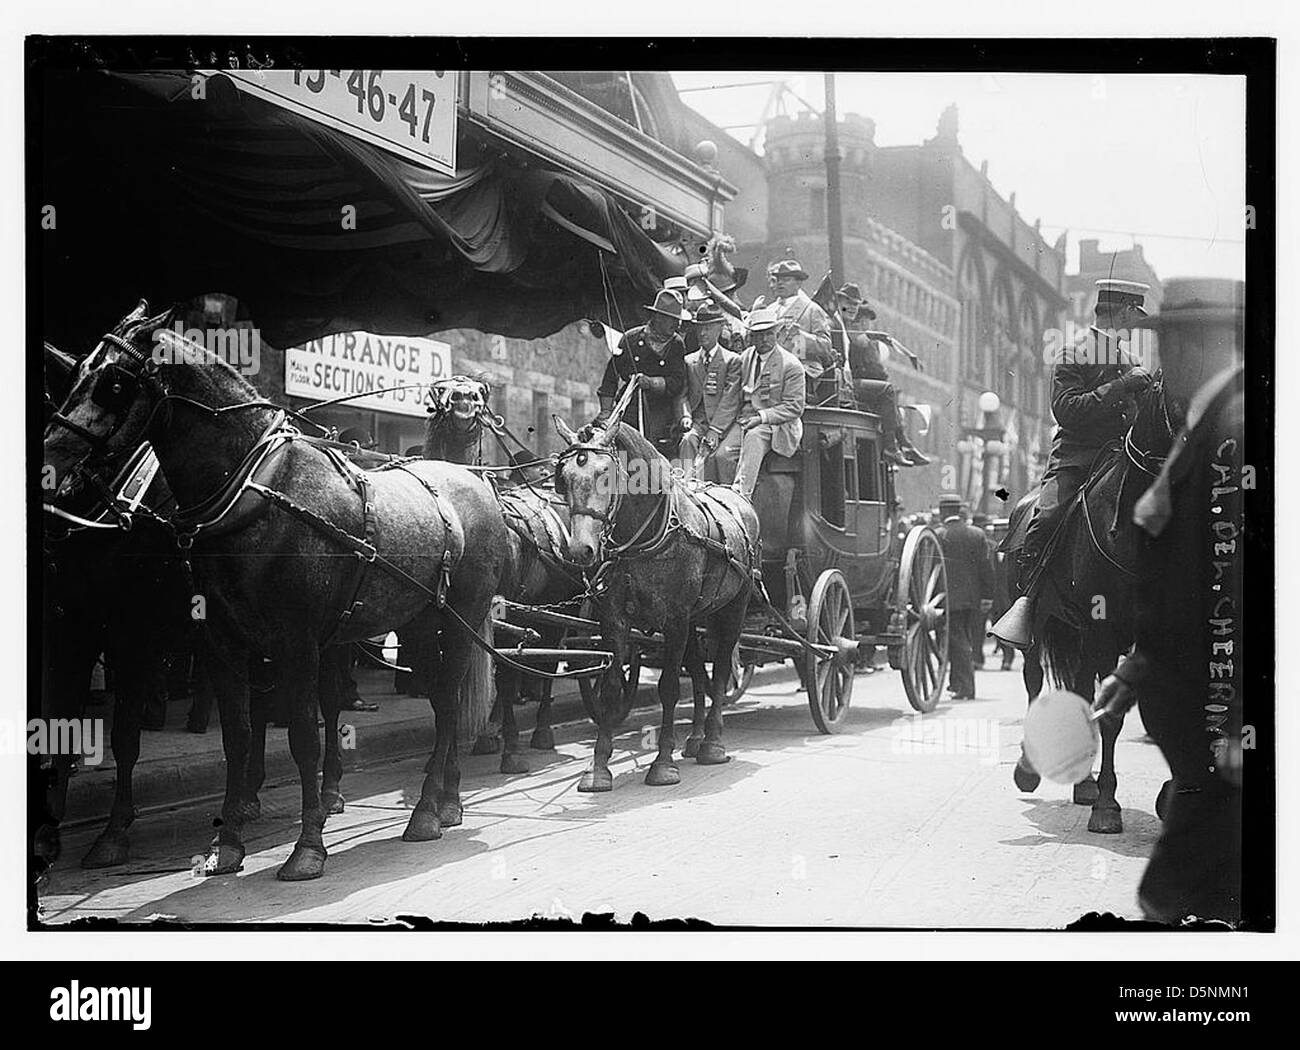 [California delegates on stagecoach at the 1912 Republican National Convention held at the Chicago Coliseum, Chicago, Illinois, June 18-22, 1912] (LOC) Stock Photo